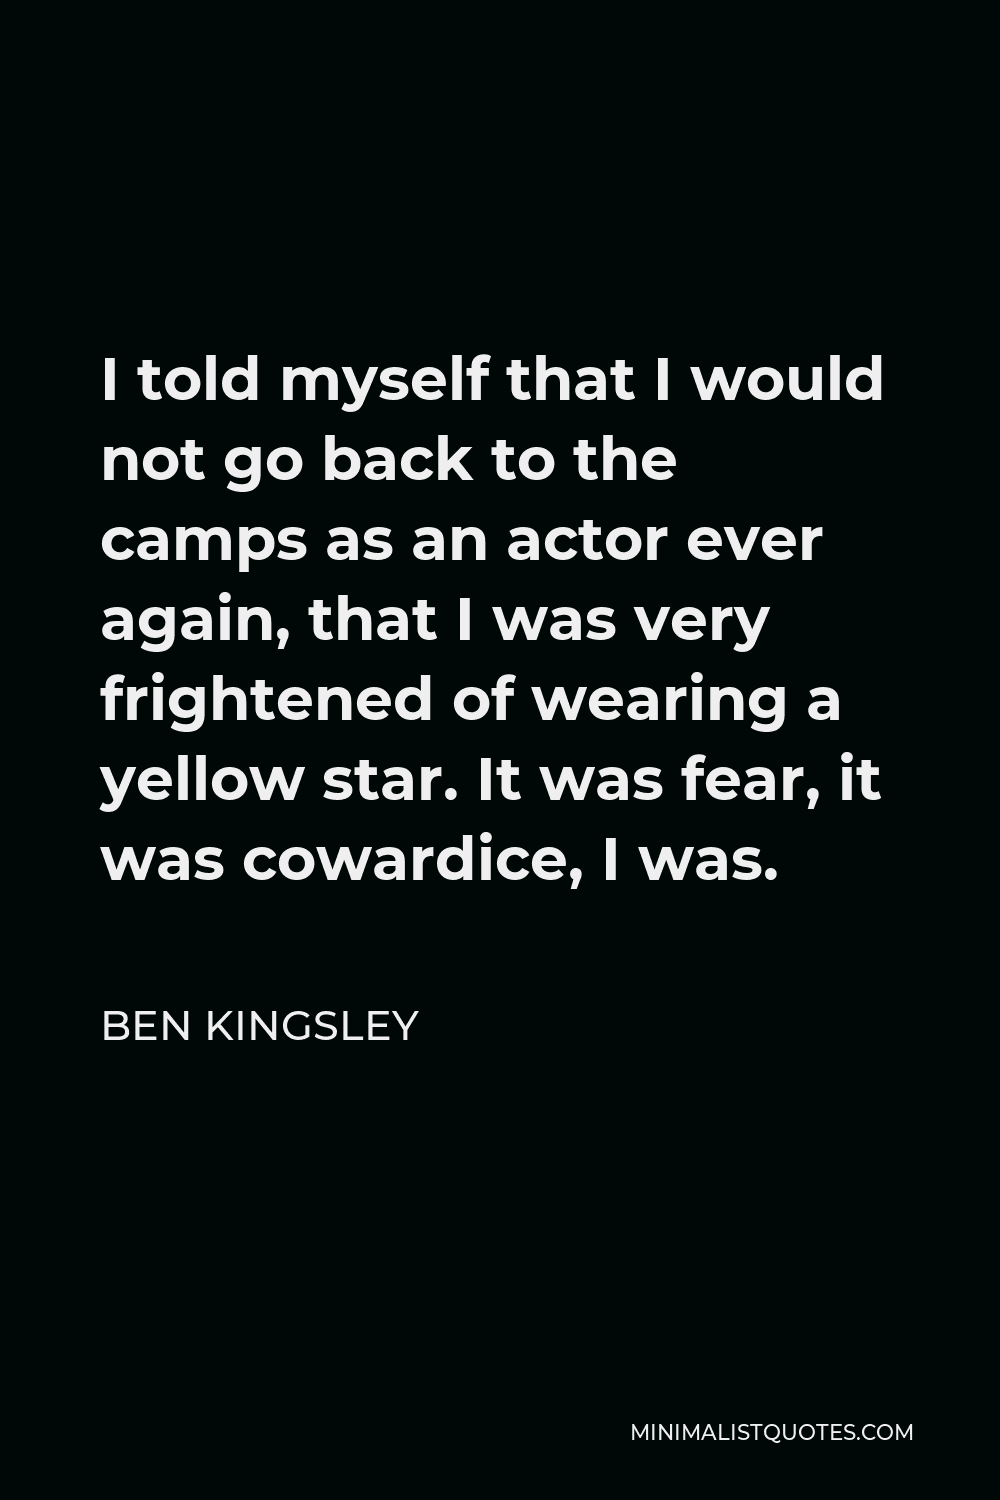 Ben Kingsley Quote - I told myself that I would not go back to the camps as an actor ever again, that I was very frightened of wearing a yellow star. It was fear, it was cowardice, I was.